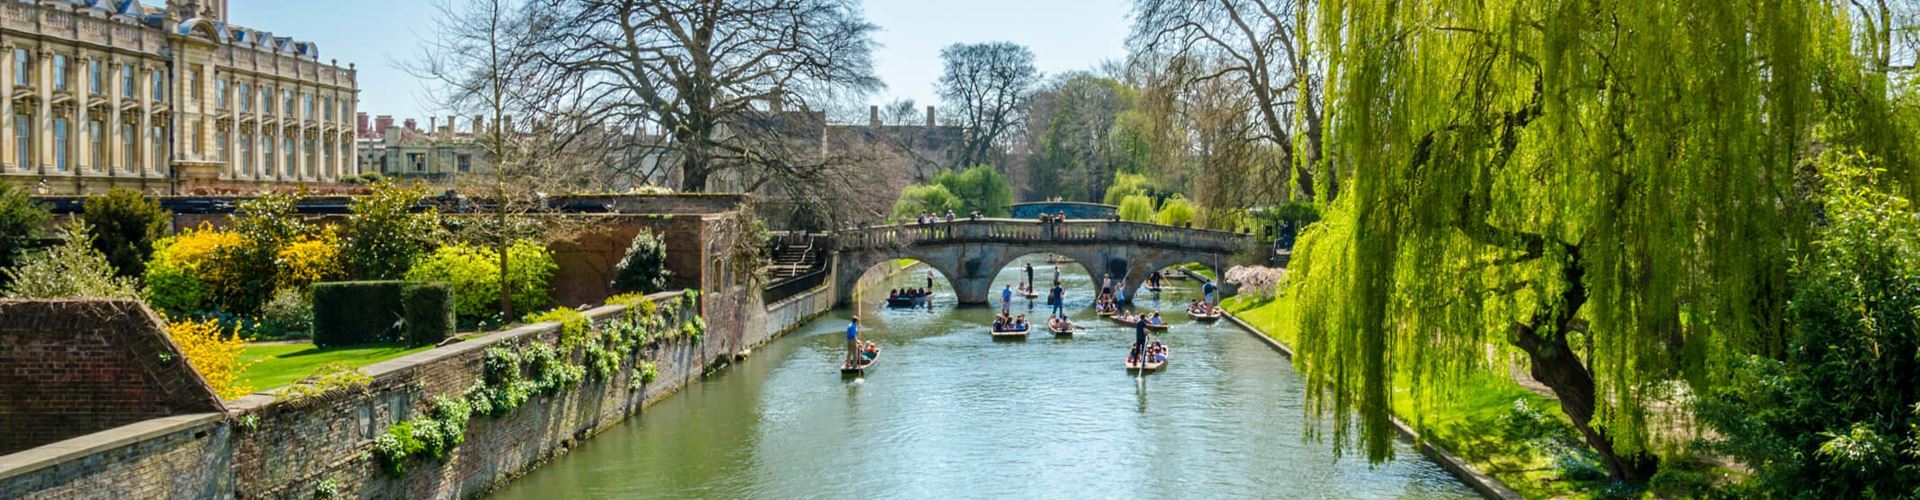 Cambridge to tackle skills gap with Step Up project